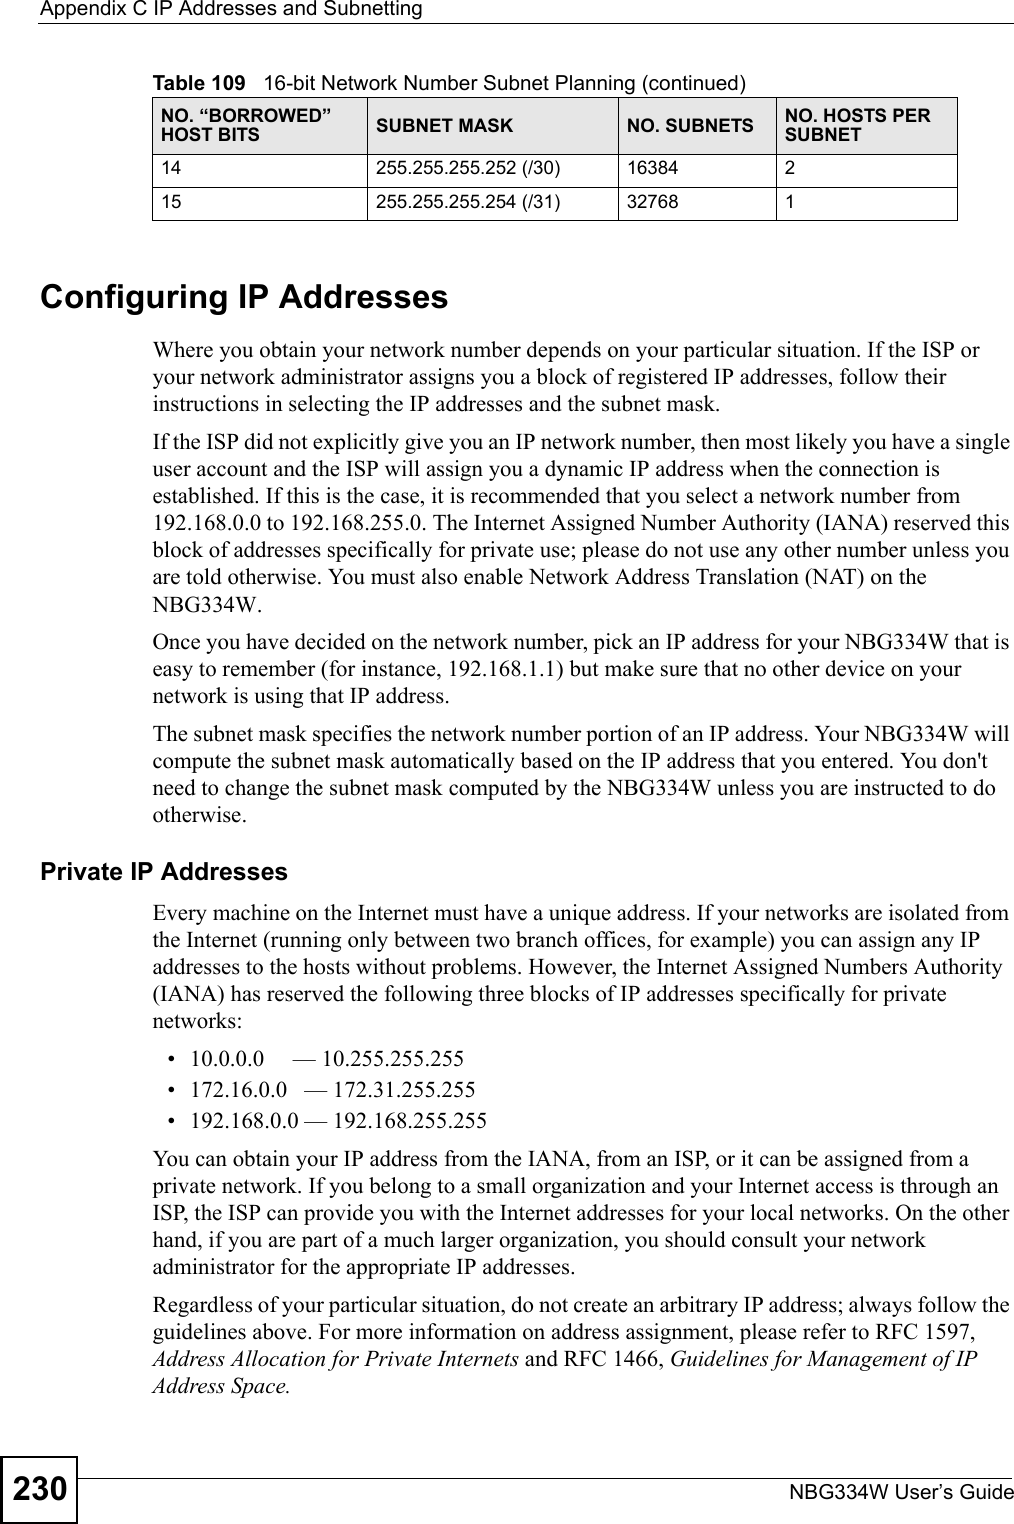 Appendix C IP Addresses and SubnettingNBG334W User’s Guide230Configuring IP AddressesWhere you obtain your network number depends on your particular situation. If the ISP or your network administrator assigns you a block of registered IP addresses, follow their instructions in selecting the IP addresses and the subnet mask.If the ISP did not explicitly give you an IP network number, then most likely you have a single user account and the ISP will assign you a dynamic IP address when the connection is established. If this is the case, it is recommended that you select a network number from 192.168.0.0 to 192.168.255.0. The Internet Assigned Number Authority (IANA) reserved this block of addresses specifically for private use; please do not use any other number unless you are told otherwise. You must also enable Network Address Translation (NAT) on the NBG334W. Once you have decided on the network number, pick an IP address for your NBG334W that is easy to remember (for instance, 192.168.1.1) but make sure that no other device on your network is using that IP address.The subnet mask specifies the network number portion of an IP address. Your NBG334W will compute the subnet mask automatically based on the IP address that you entered. You don&apos;t need to change the subnet mask computed by the NBG334W unless you are instructed to do otherwise.Private IP AddressesEvery machine on the Internet must have a unique address. If your networks are isolated from the Internet (running only between two branch offices, for example) you can assign any IP addresses to the hosts without problems. However, the Internet Assigned Numbers Authority (IANA) has reserved the following three blocks of IP addresses specifically for private networks:• 10.0.0.0     — 10.255.255.255• 172.16.0.0   — 172.31.255.255• 192.168.0.0 — 192.168.255.255You can obtain your IP address from the IANA, from an ISP, or it can be assigned from a private network. If you belong to a small organization and your Internet access is through an ISP, the ISP can provide you with the Internet addresses for your local networks. On the other hand, if you are part of a much larger organization, you should consult your network administrator for the appropriate IP addresses.Regardless of your particular situation, do not create an arbitrary IP address; always follow the guidelines above. For more information on address assignment, please refer to RFC 1597, Address Allocation for Private Internets and RFC 1466, Guidelines for Management of IP Address Space.14 255.255.255.252 (/30) 16384 215 255.255.255.254 (/31) 32768 1Table 109   16-bit Network Number Subnet Planning (continued)NO. “BORROWED” HOST BITS SUBNET MASK NO. SUBNETS NO. HOSTS PER SUBNET